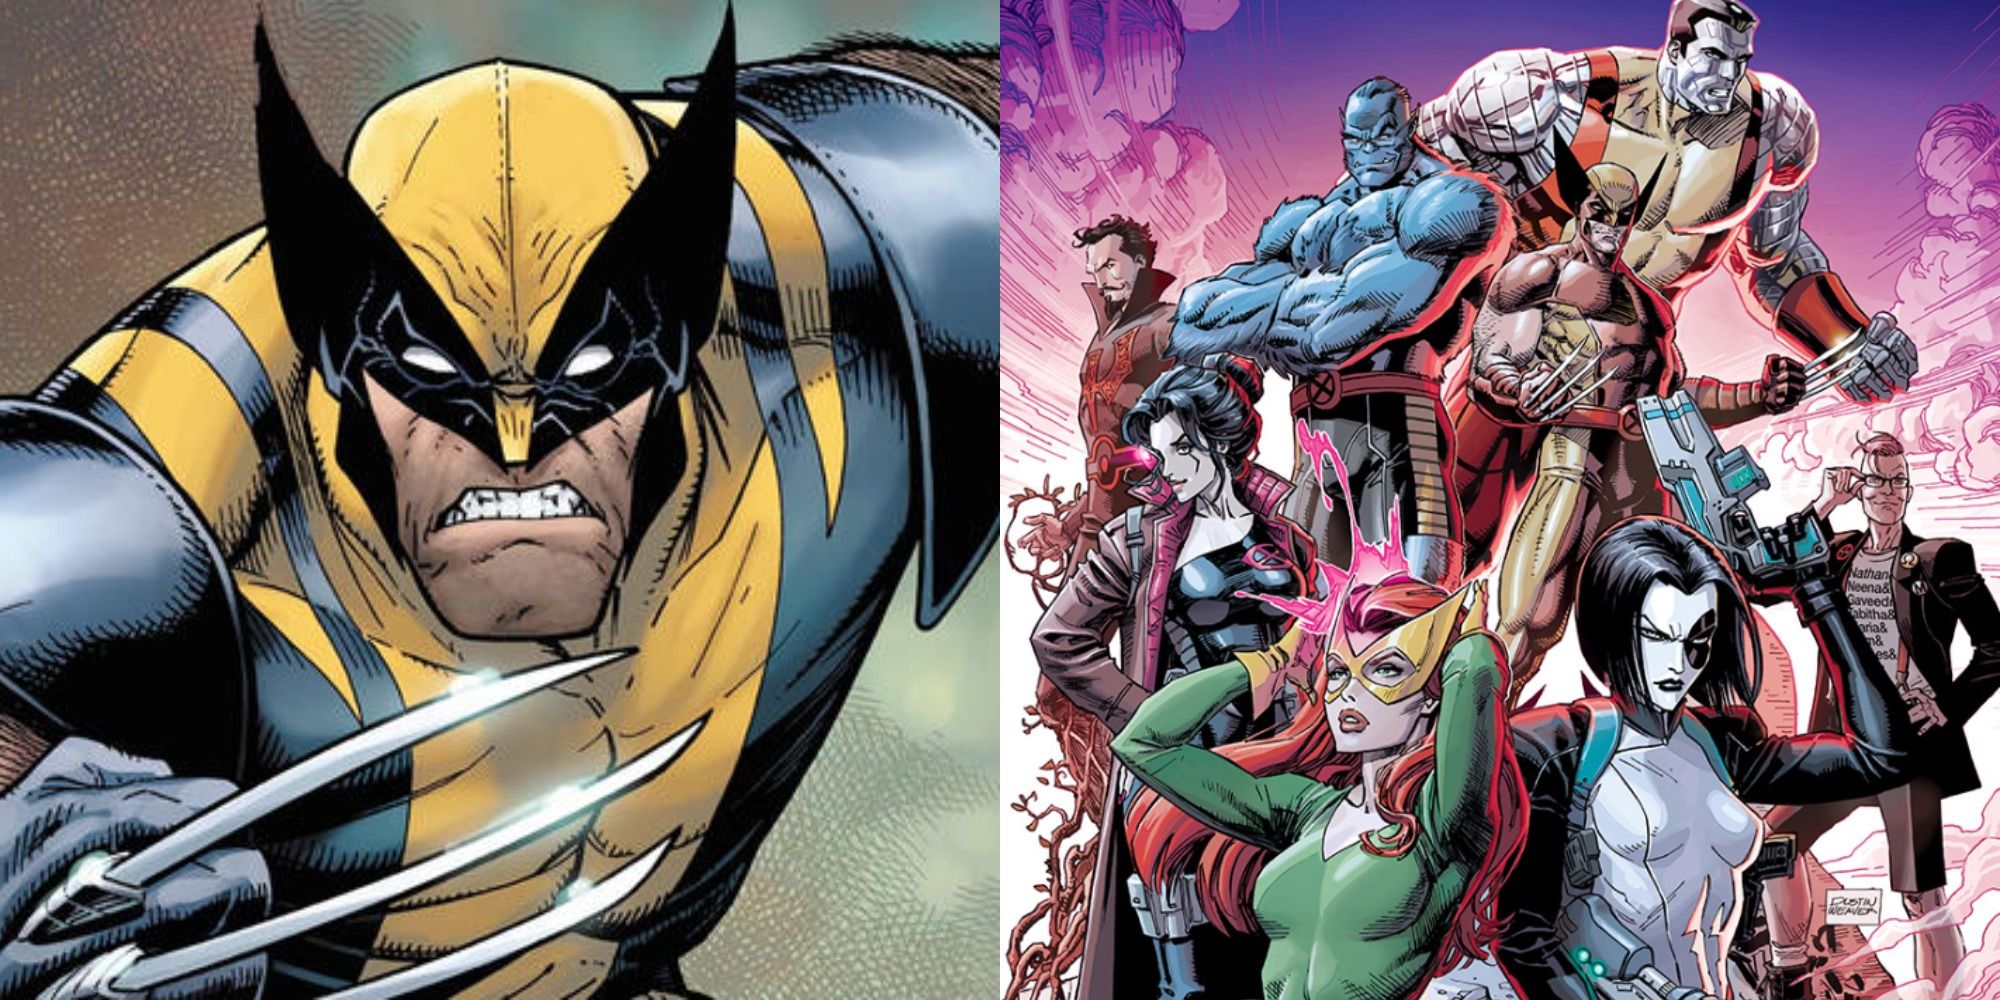 Split image of Wolverine baring his claws and posing with other mutants